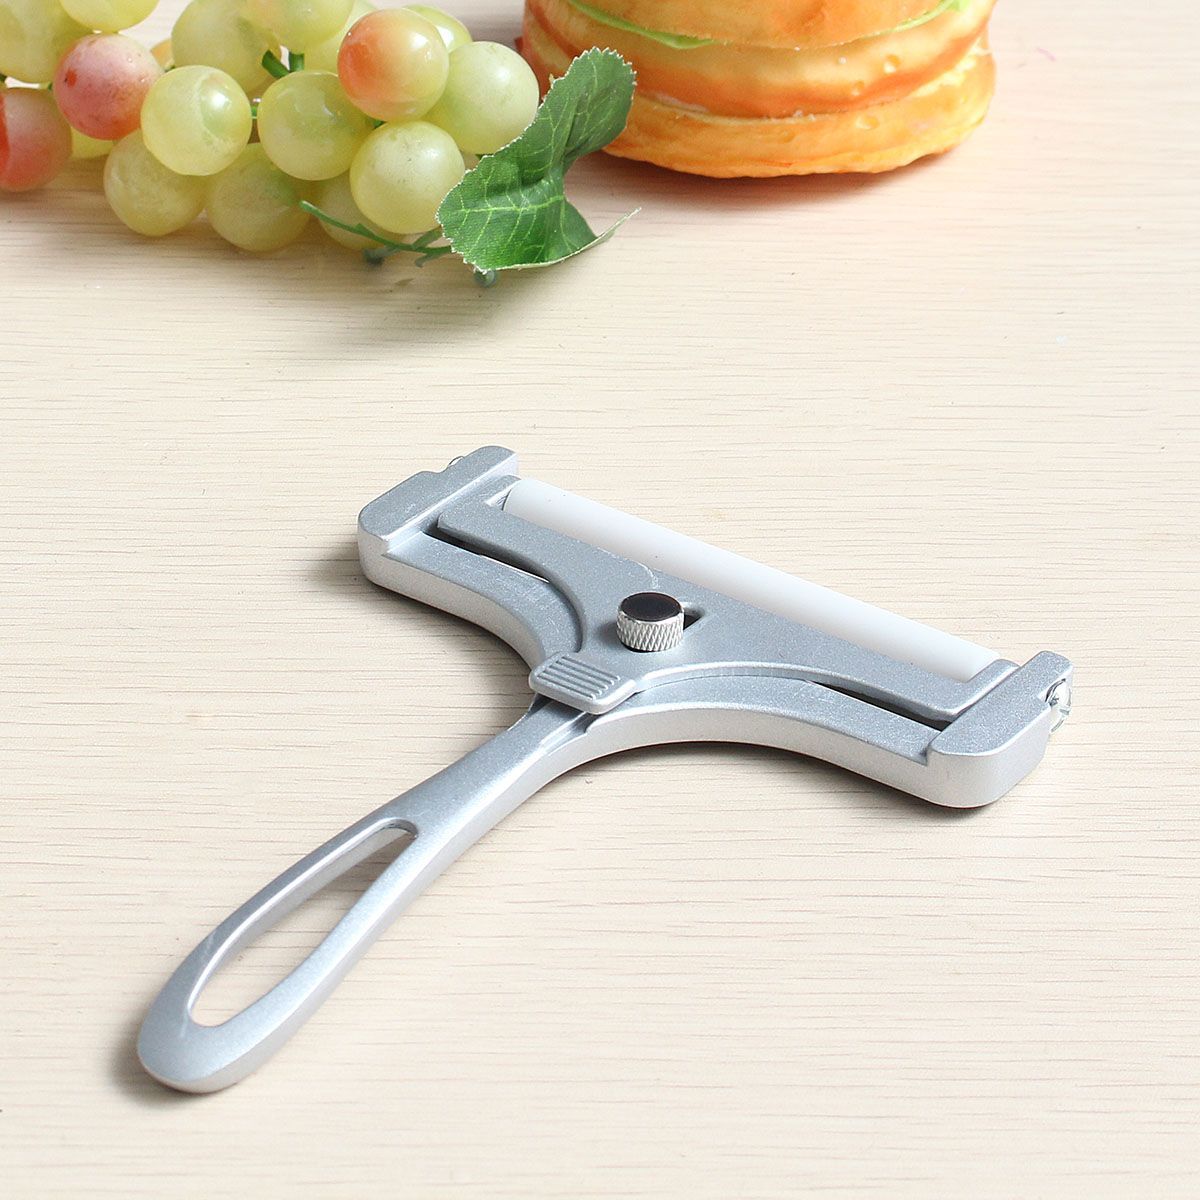 Adjustable-Stainless-Steel-Cutting-Cutter-Wire-Cheese-Slicer-1272251